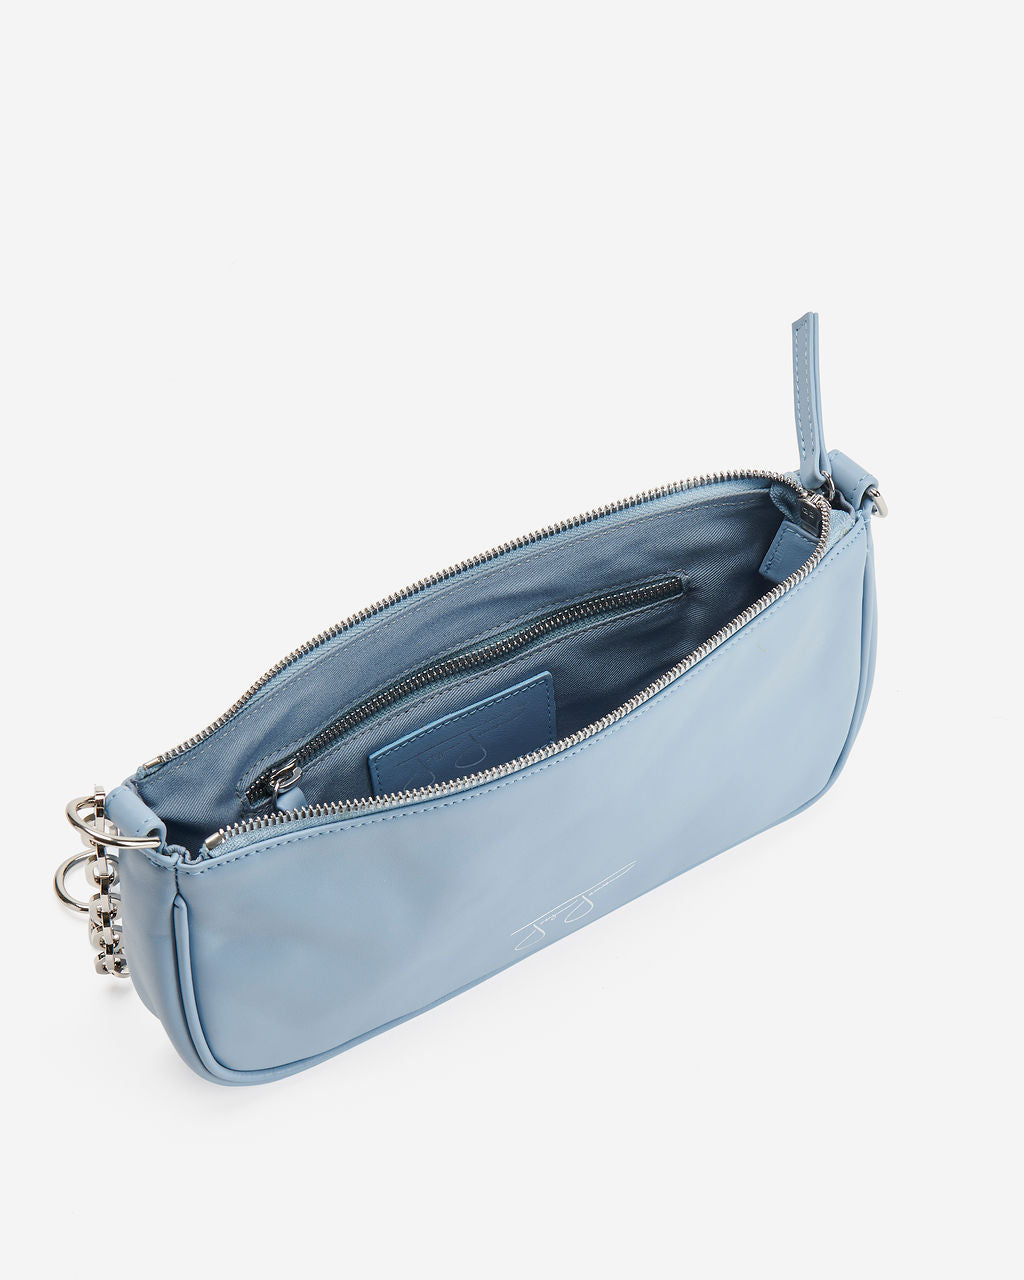 Lucy Bag - Light Blue  Joey James, The Label   